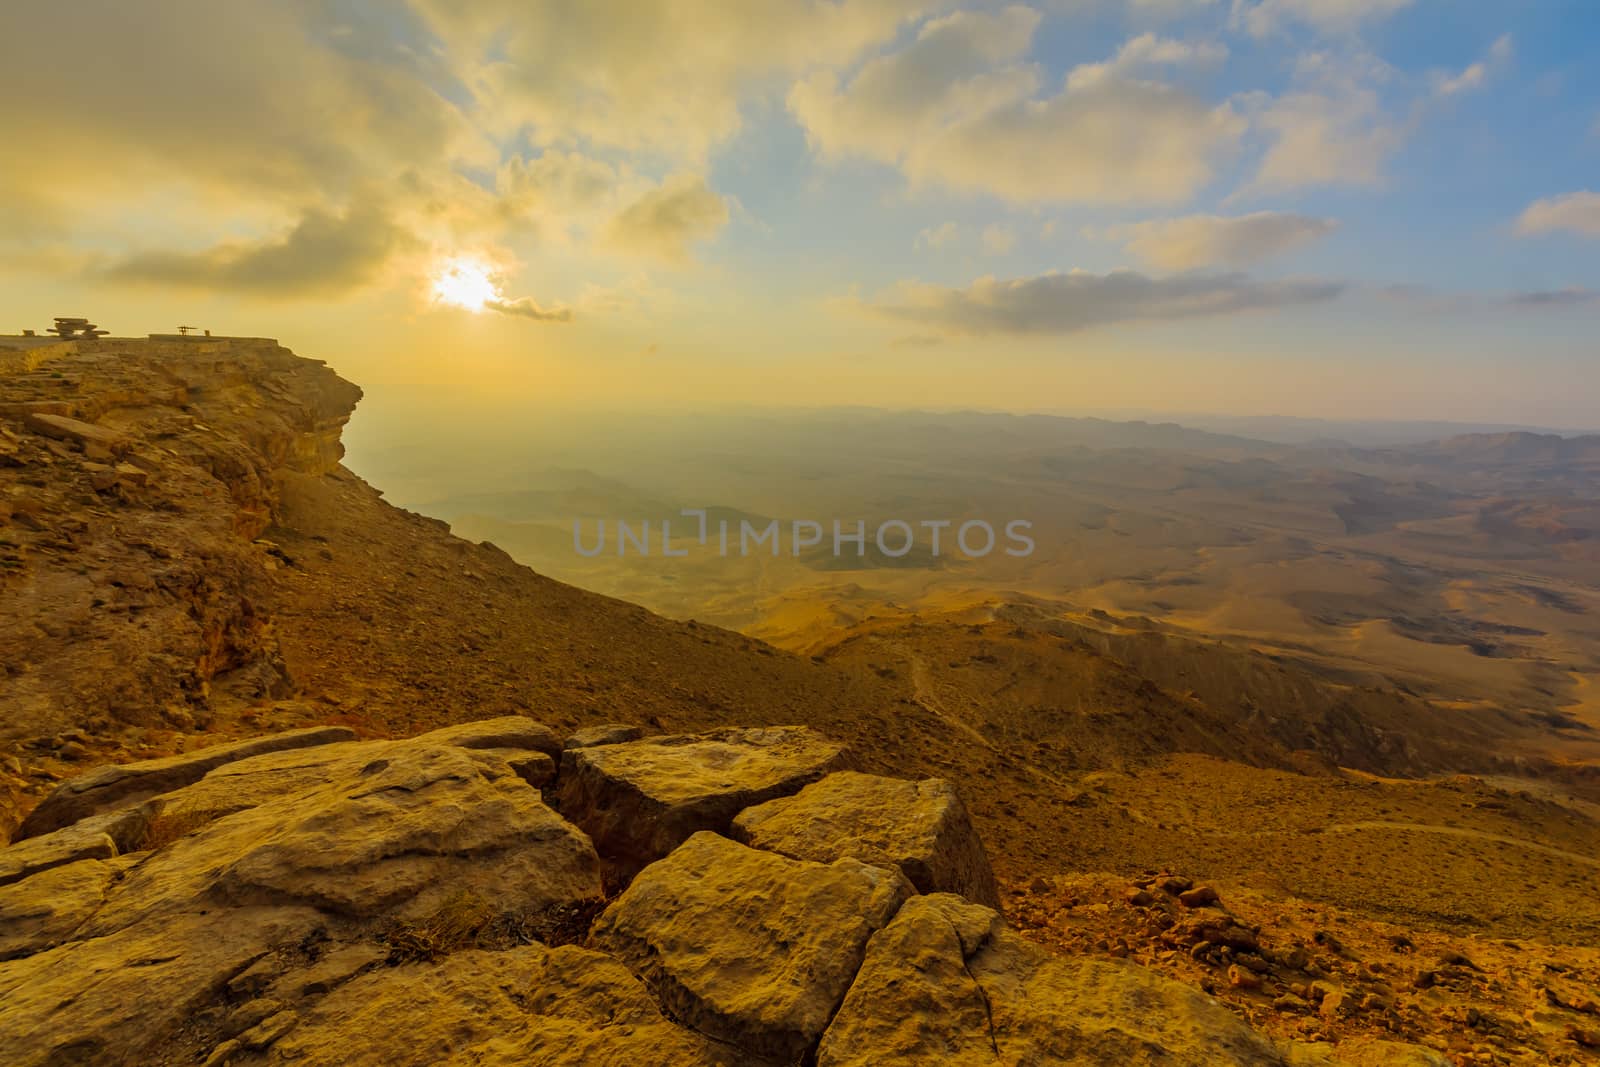 Sunrise view of cliffs and landscape in Makhtesh (crater) Ramon, the Negev Desert, Southern Israel